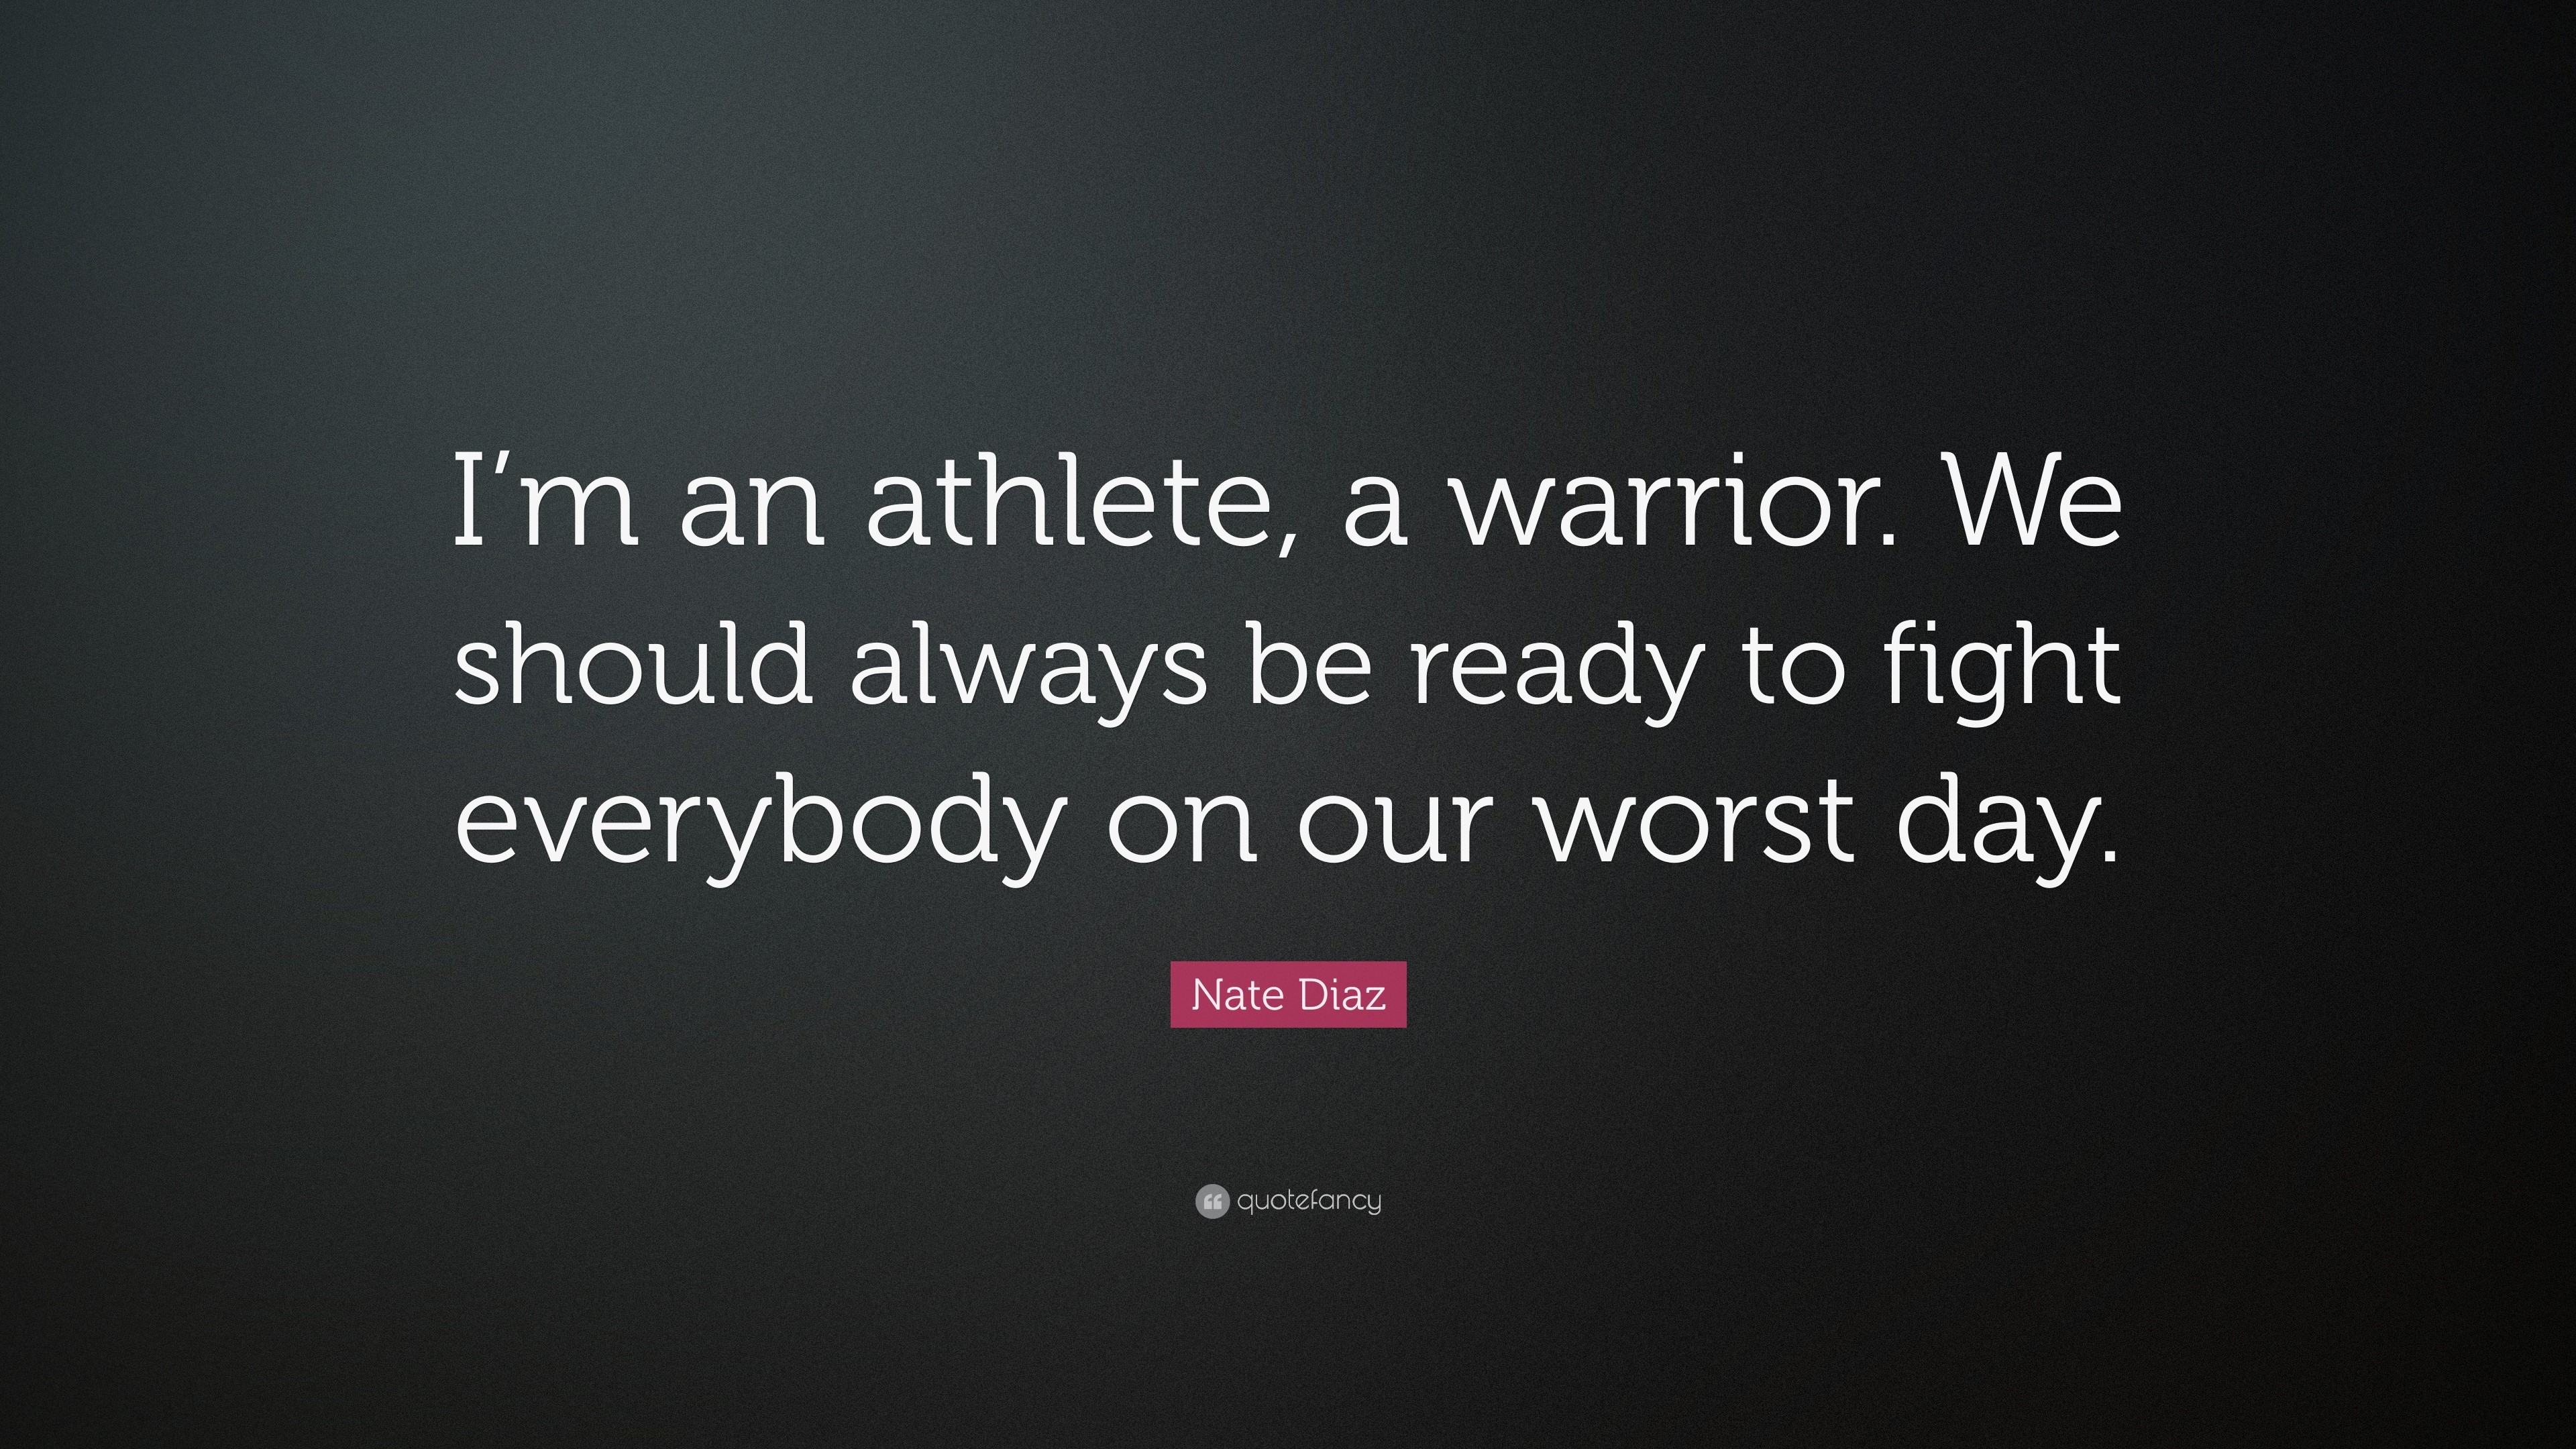 3840x2160 Nate Diaz Quote: “I'm an athlete, a warrior. We should